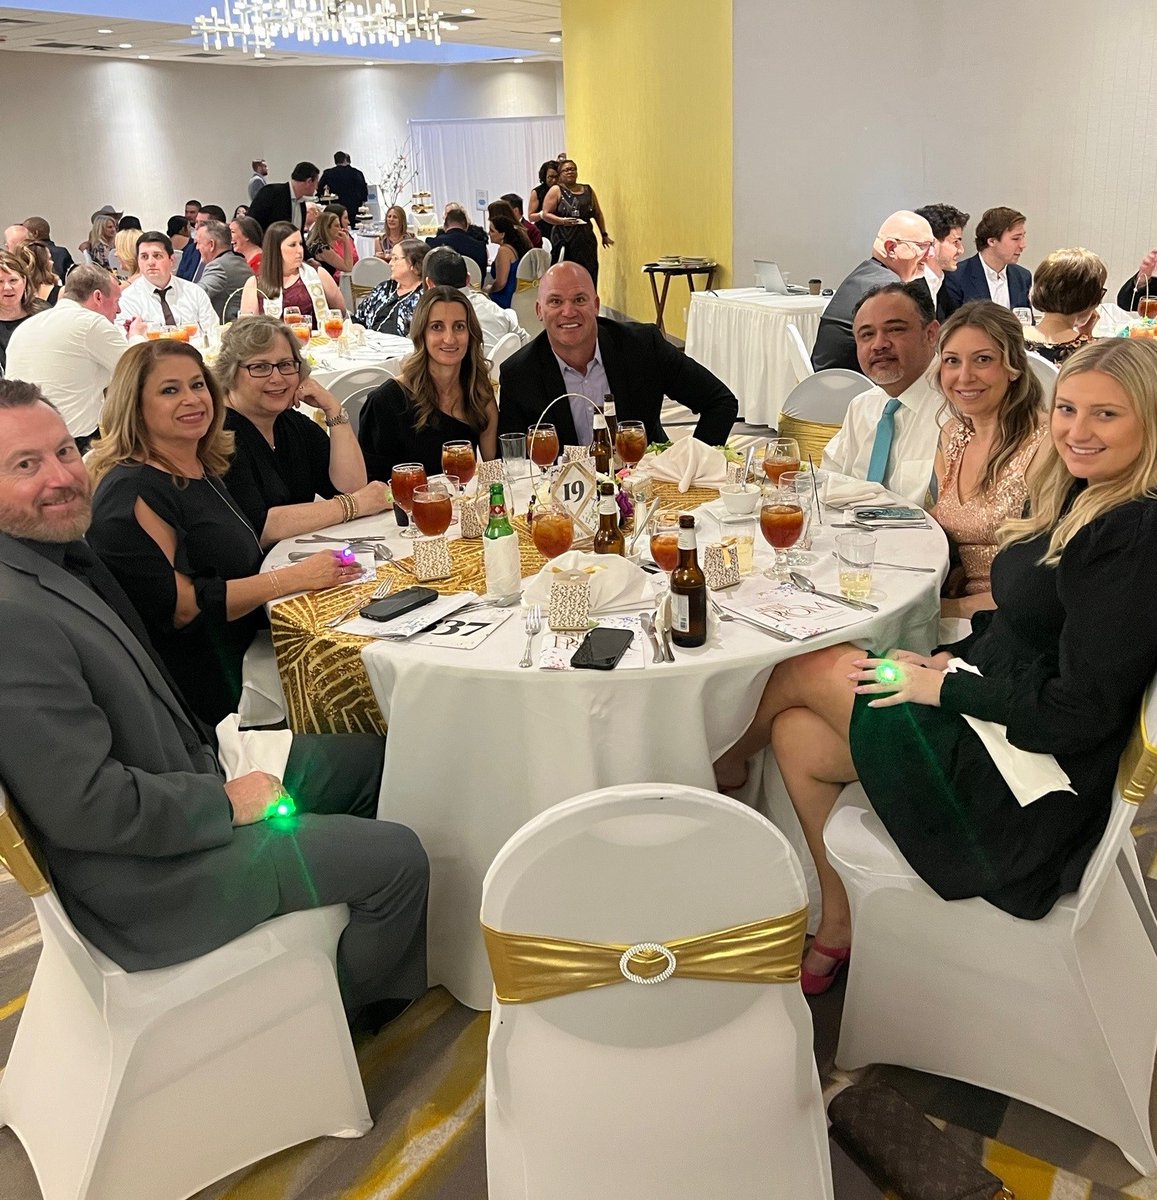 Thank you Richardson Independent School District and The Richardson ISD Foundation for a wonderful time on Saturday celebrating the impact of the foundation on students and staff. #OneCMC #BuildTexasProud #K12Construction